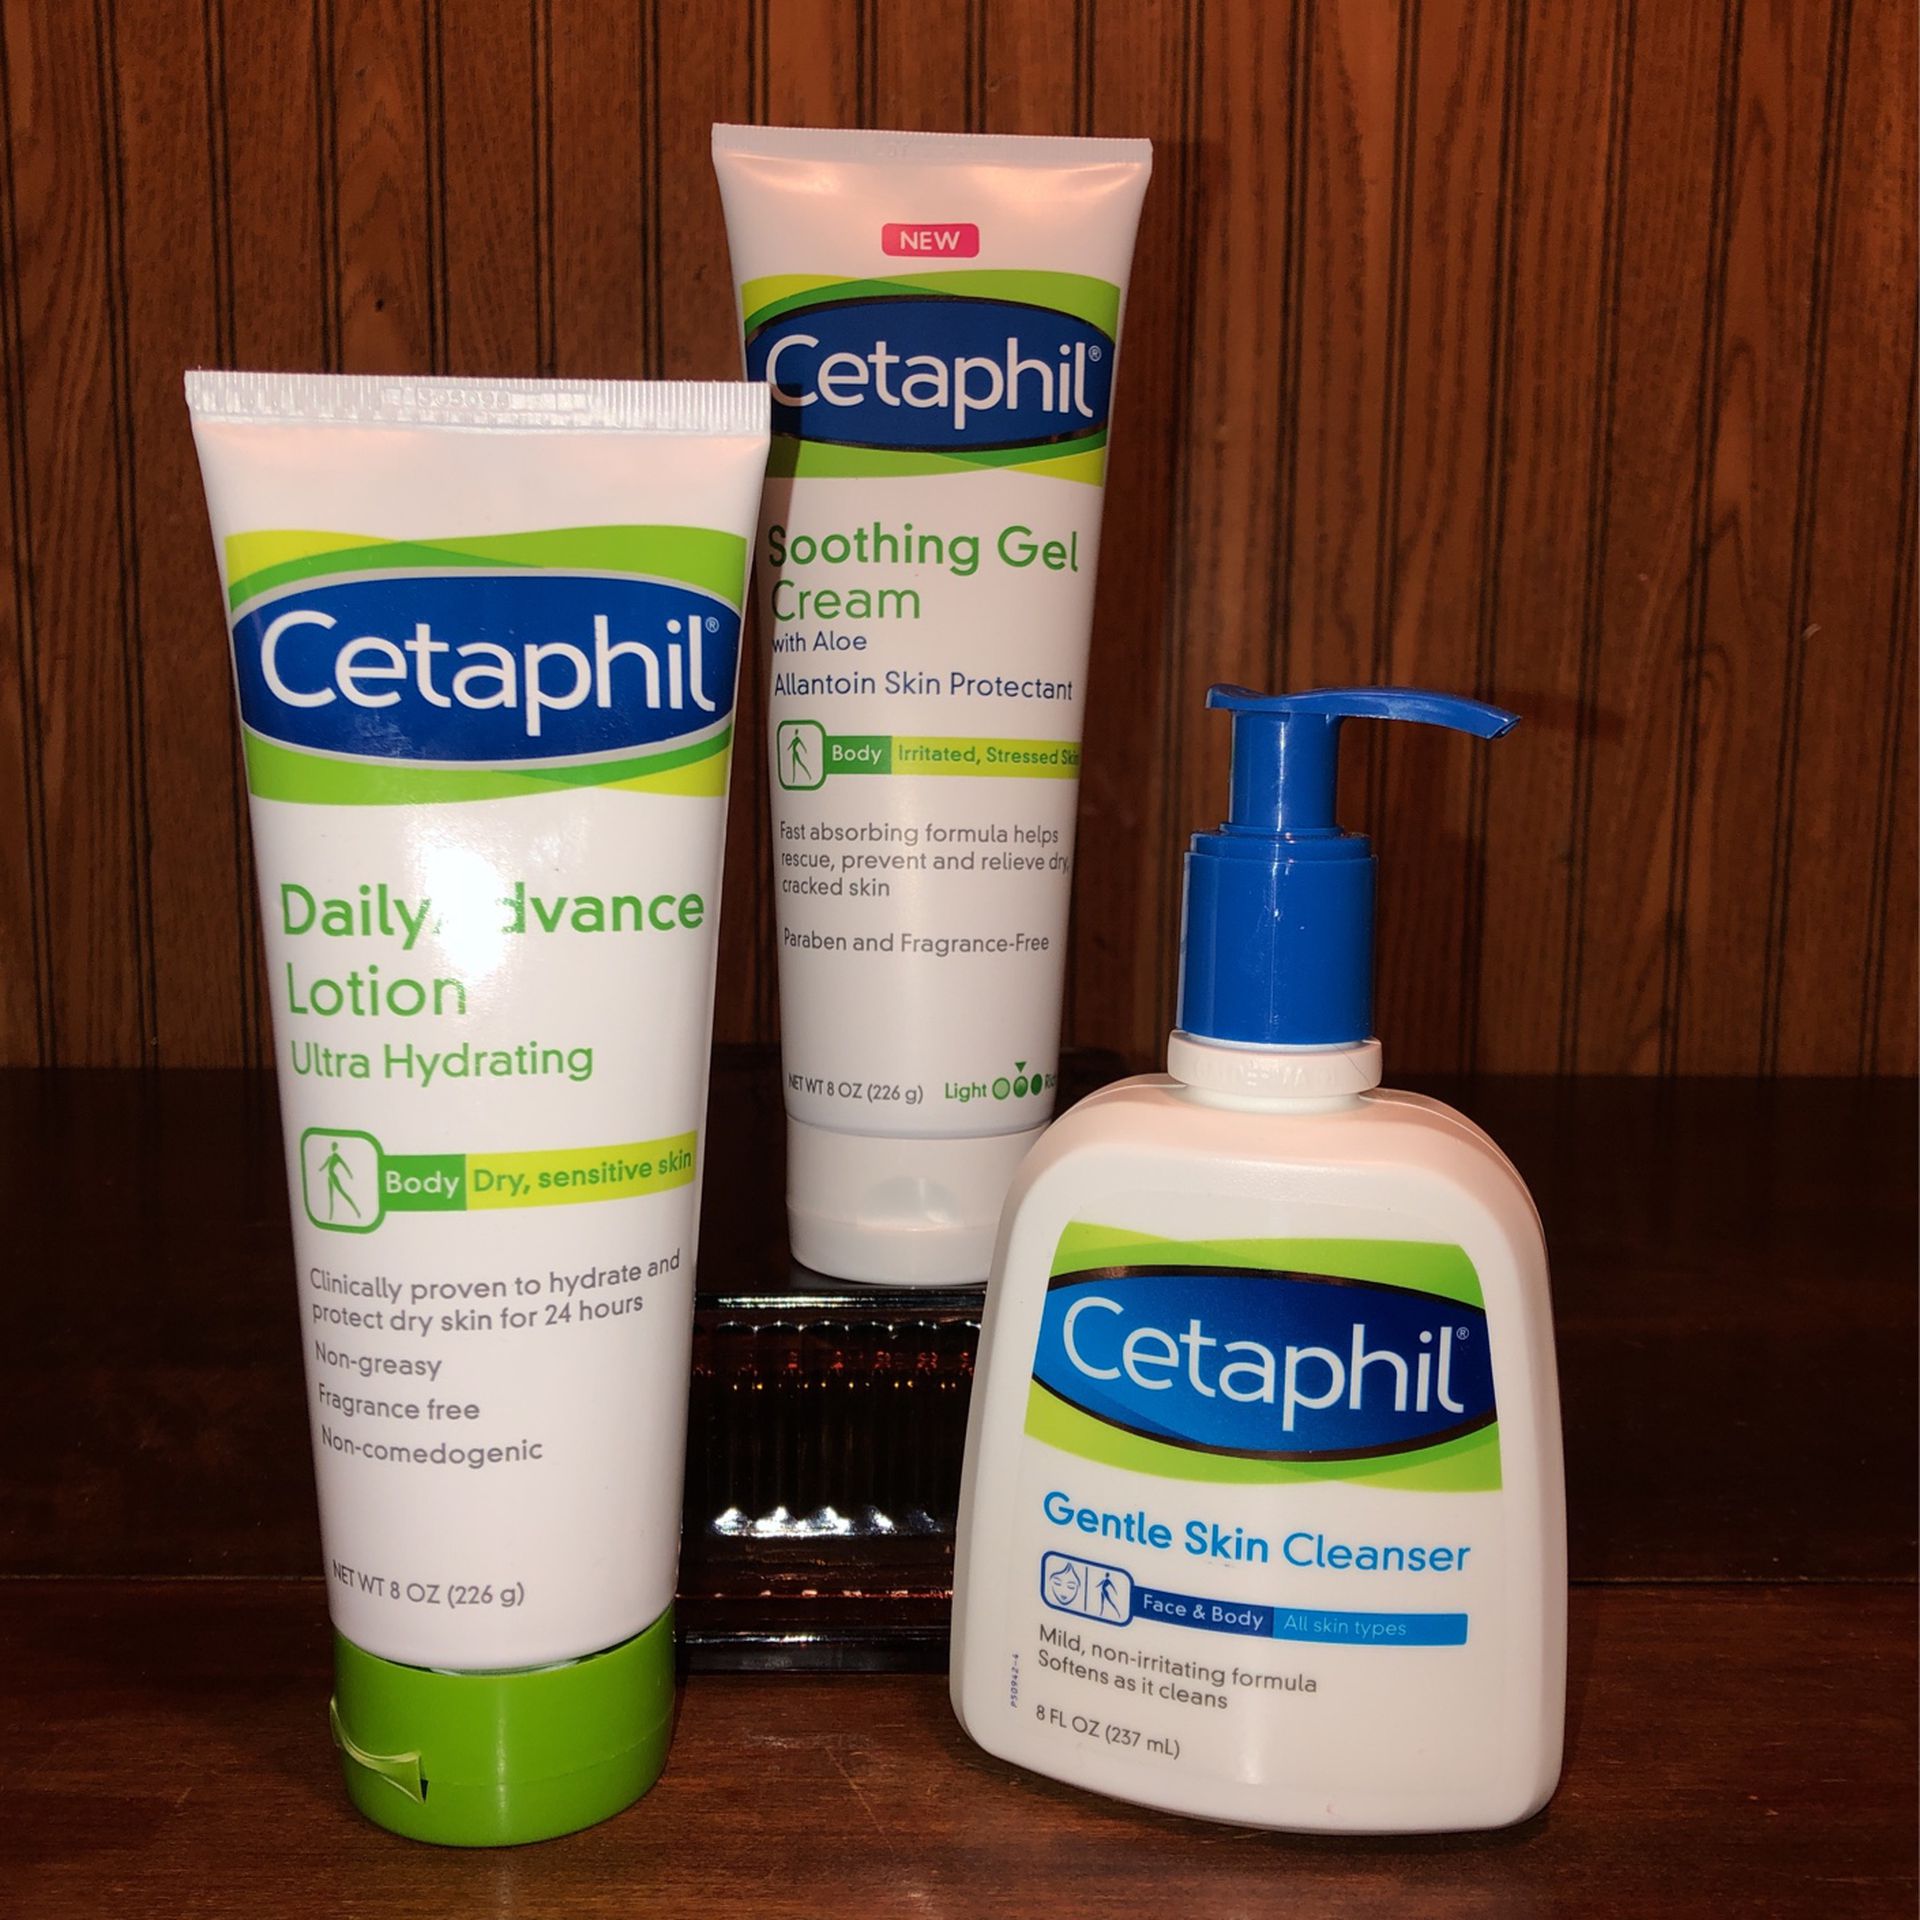 All Brand NEW! 🆕 Cetaphil brand Skin Care Products (((PENDING PICK UP TODAY)))